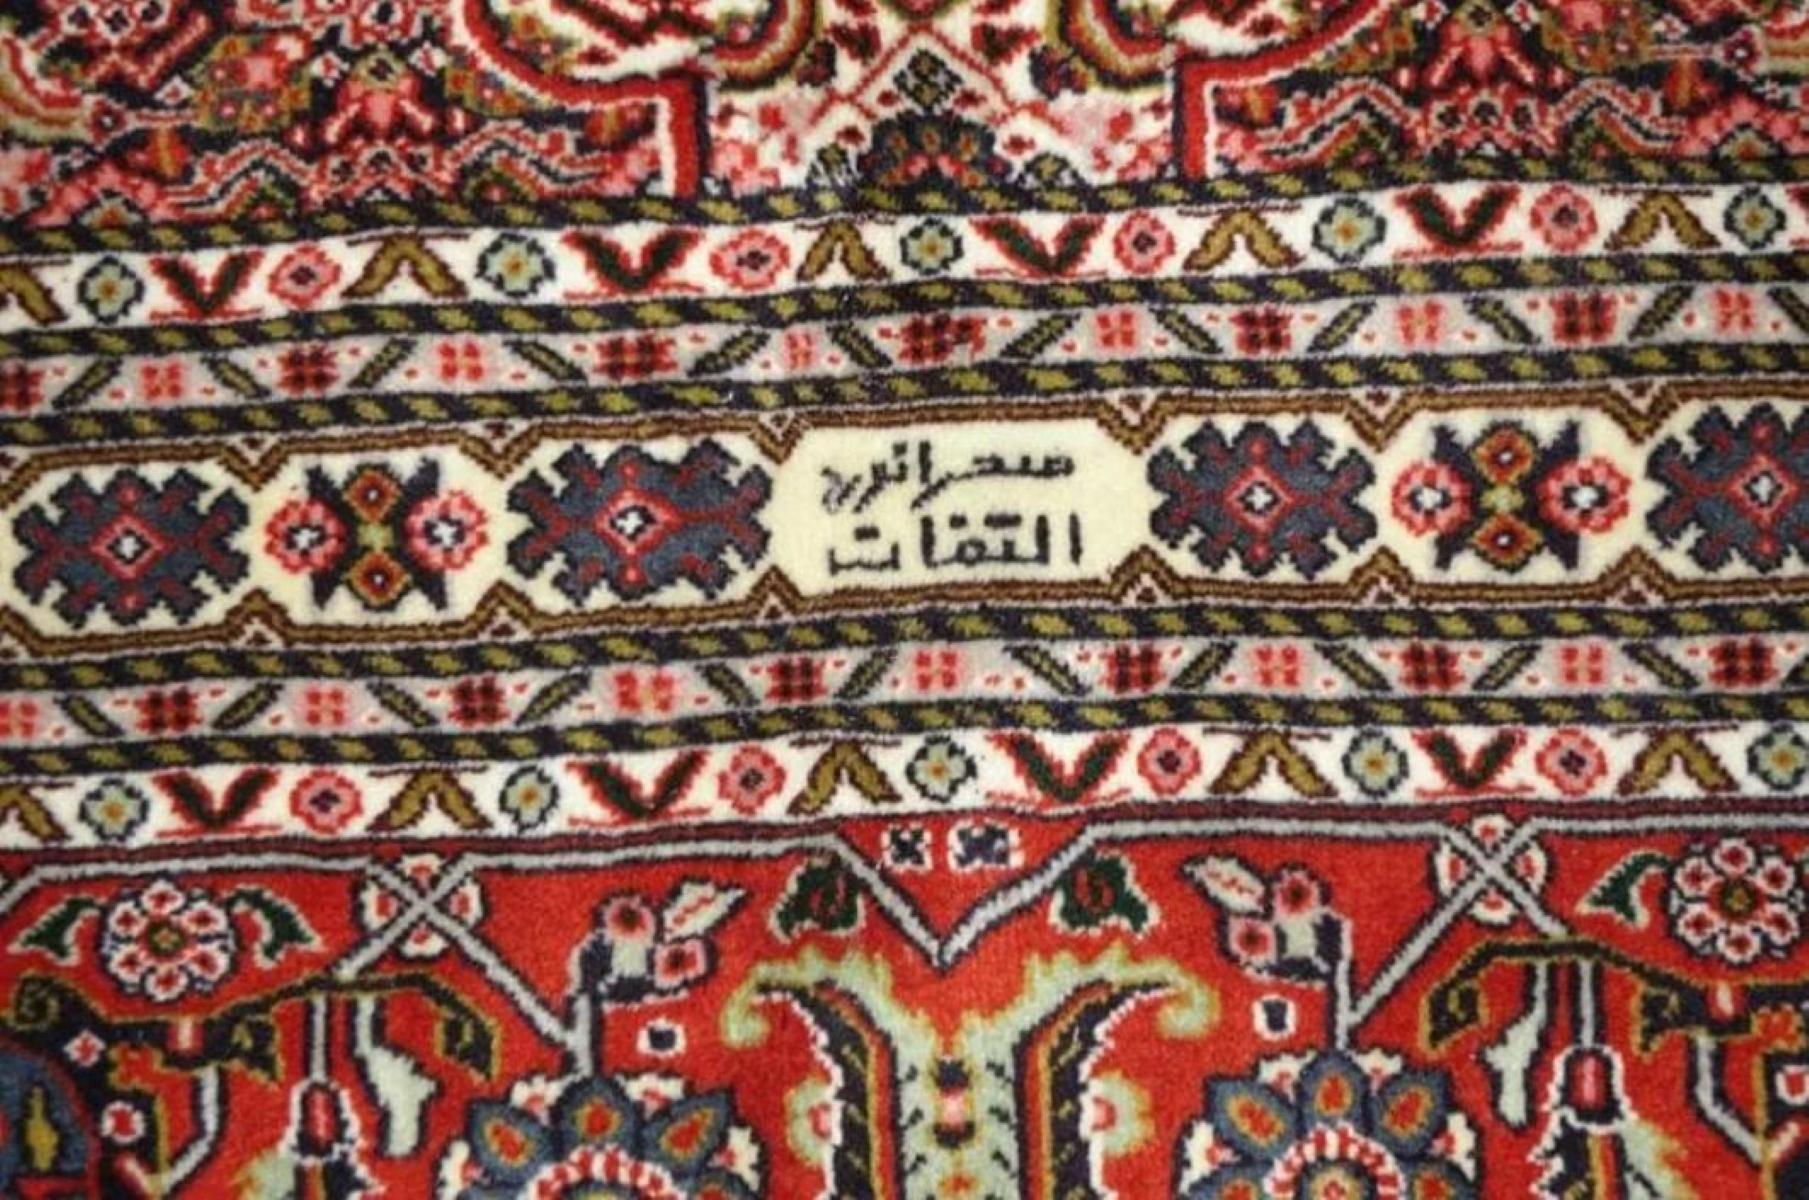 Very fine Persian Tabriz Silk & Wool Rug - 8.3' x 11.5' In Excellent Condition For Sale In Newmanstown, PA